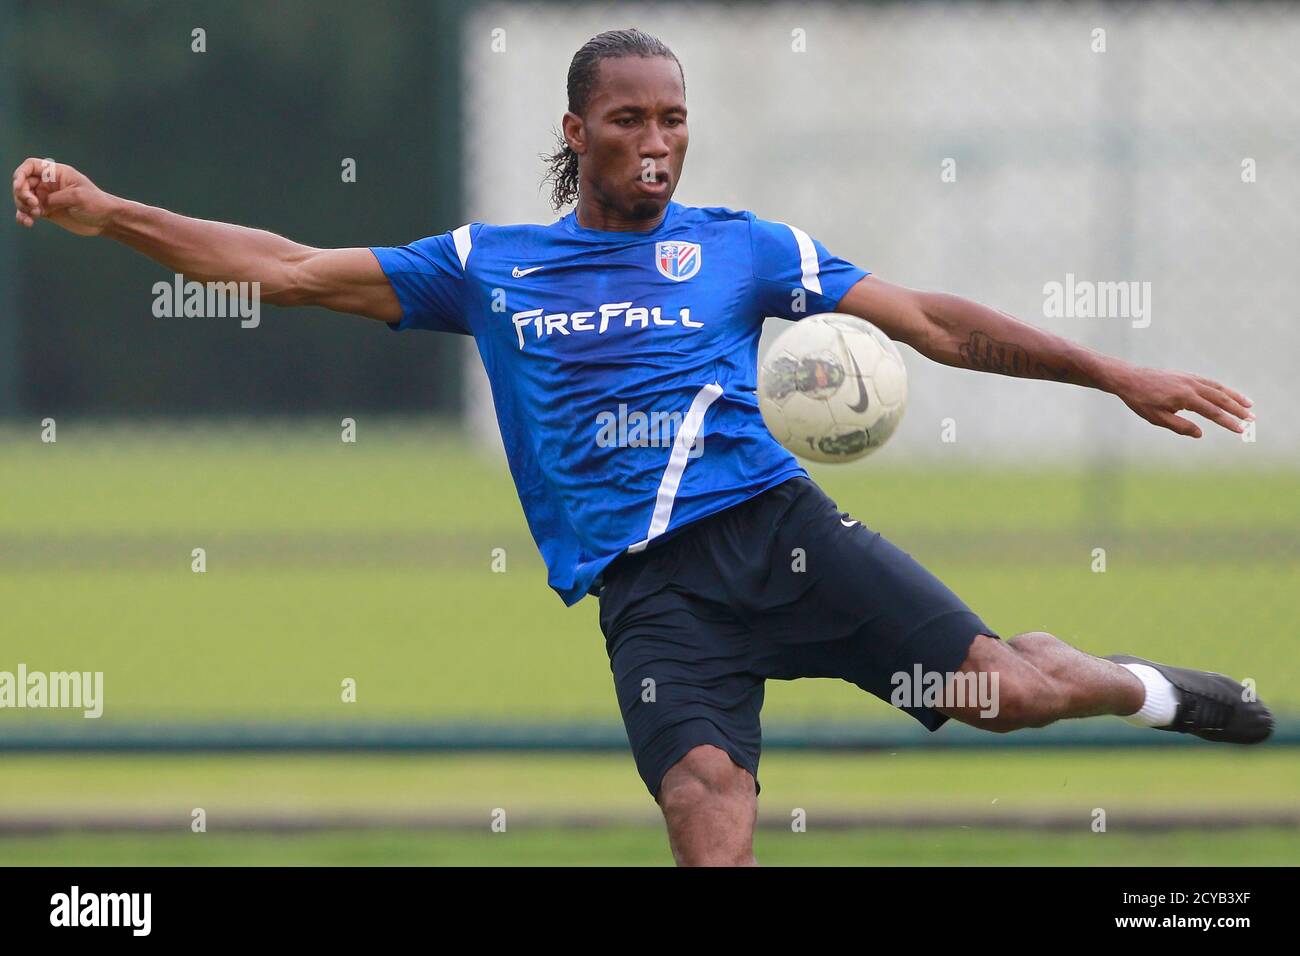 Shanghai Shenhua Striker Didier Drogba Of Ivory Coast Kicks A Ball During A Training Session In Shanghai July 16 12 Drogba Has Signed A Two And A Half Year Contract With The Big Spending Chinese Super League